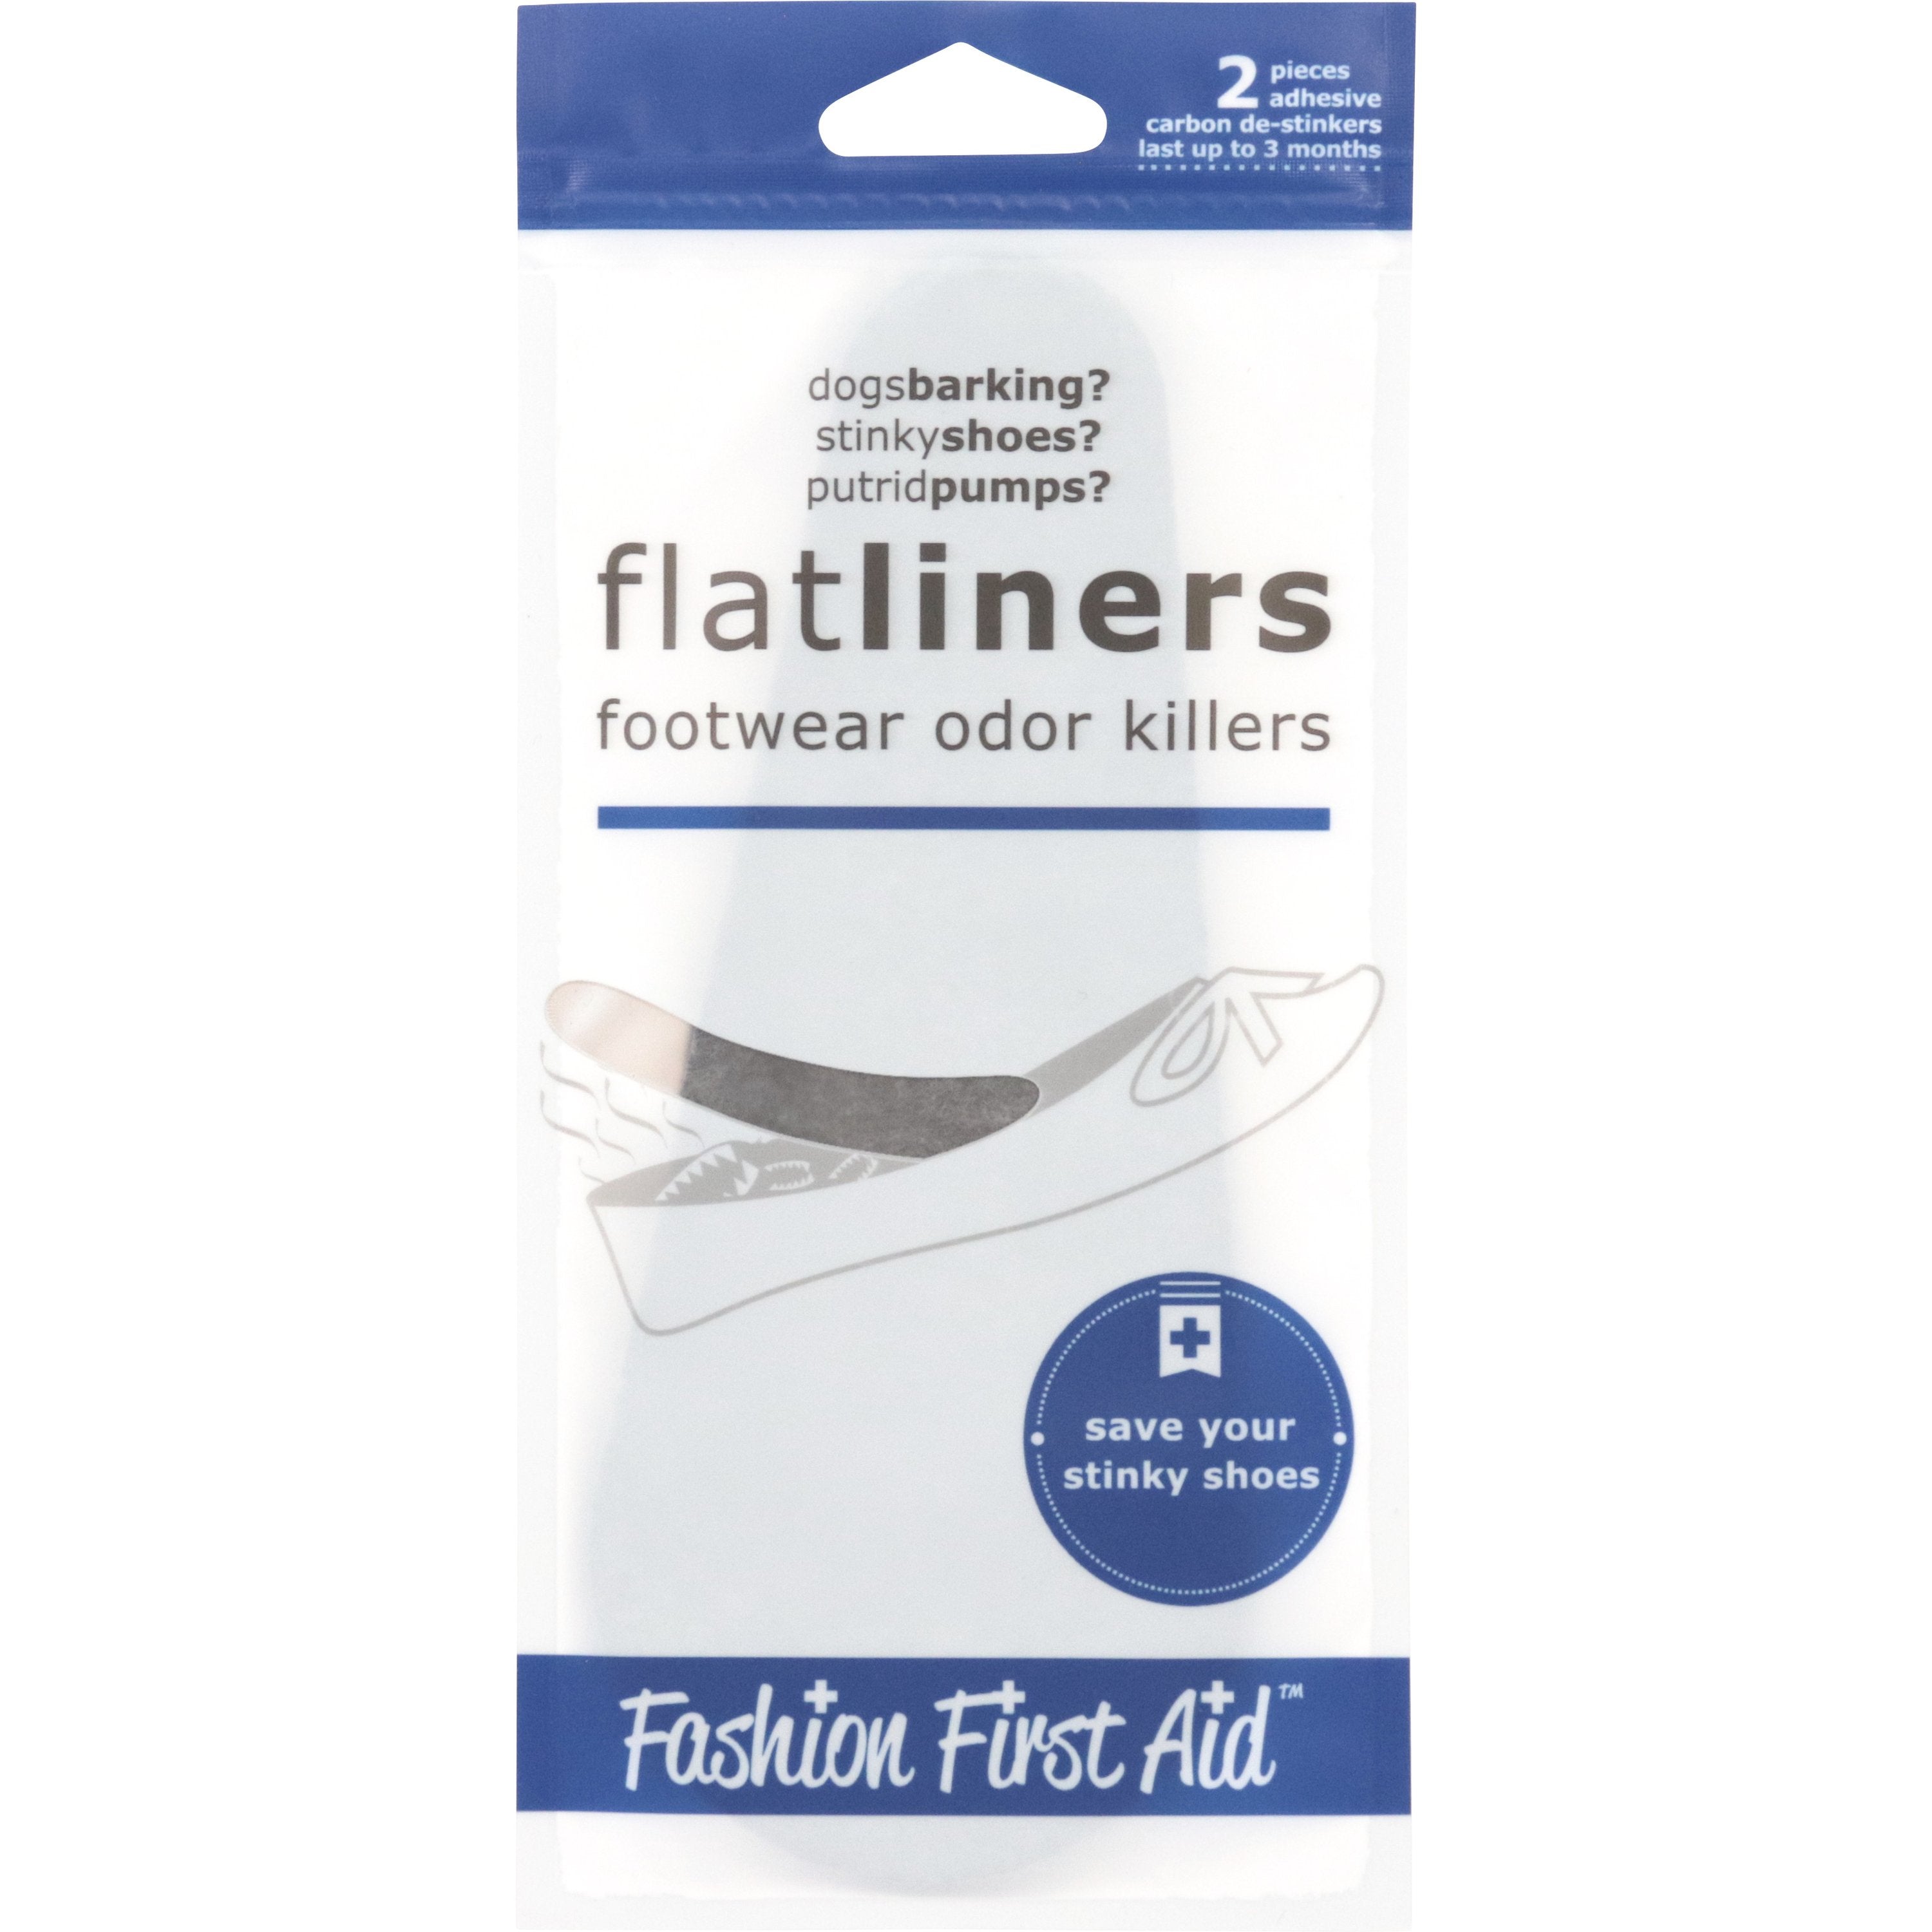 Flat Liners: activated carbon shoe odor killers